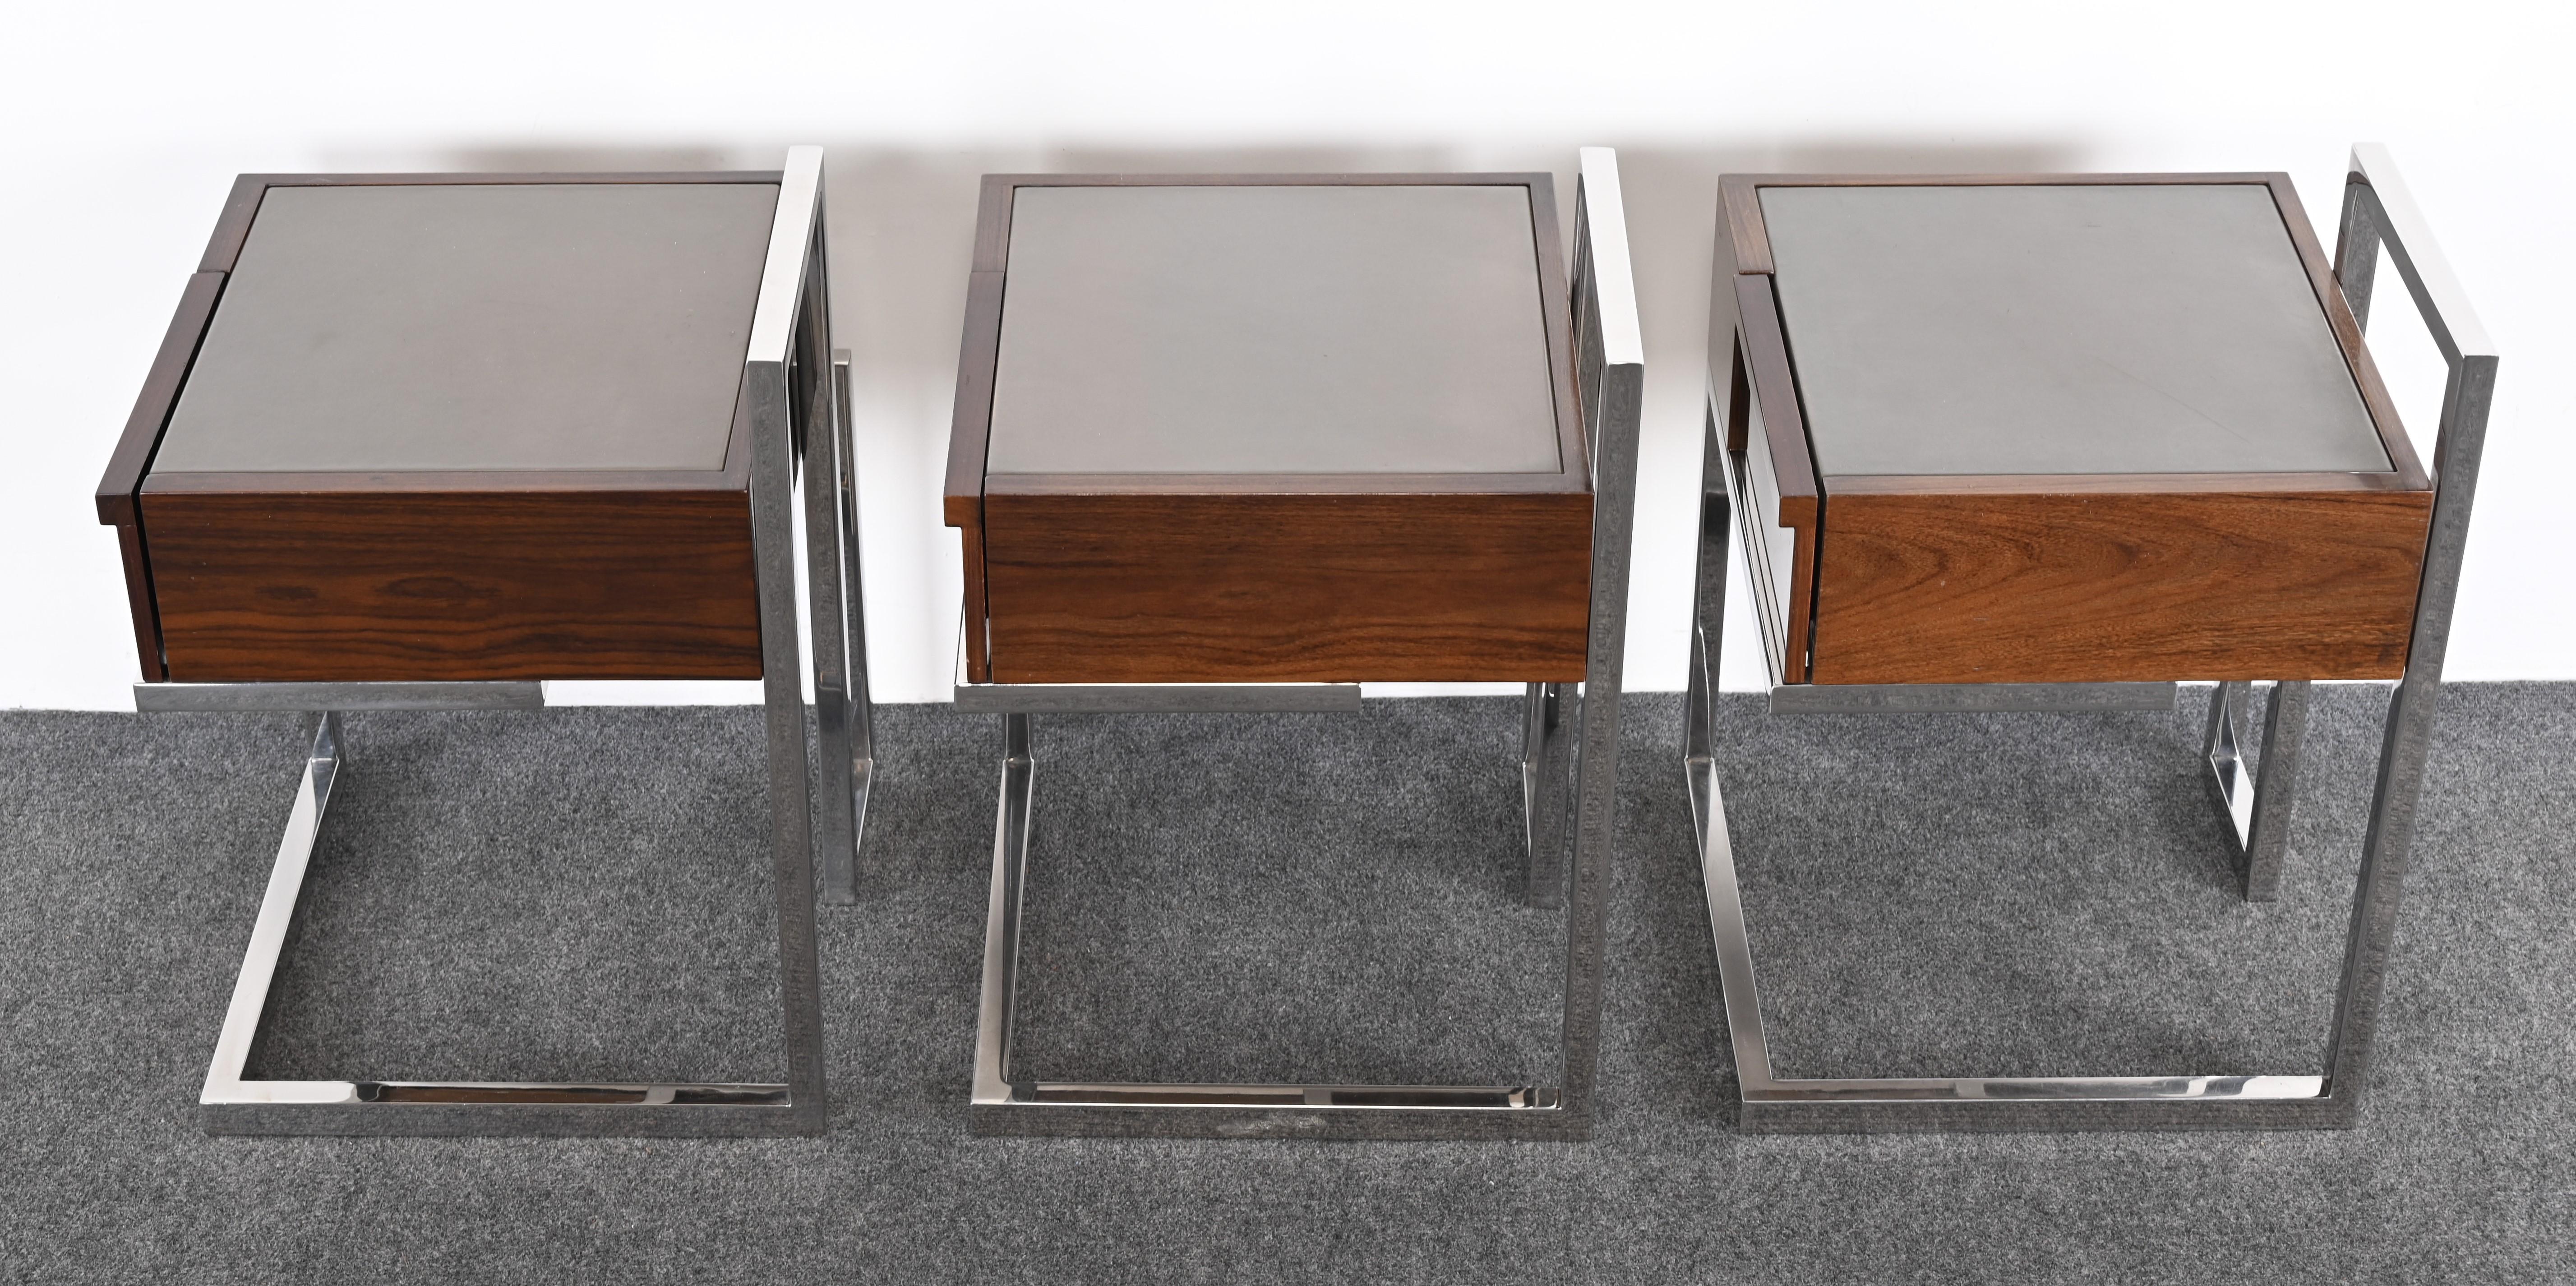 Lacquered Walnut and Stainless Steel End Tables by Vladimir Kagan for Gucci For Sale 8